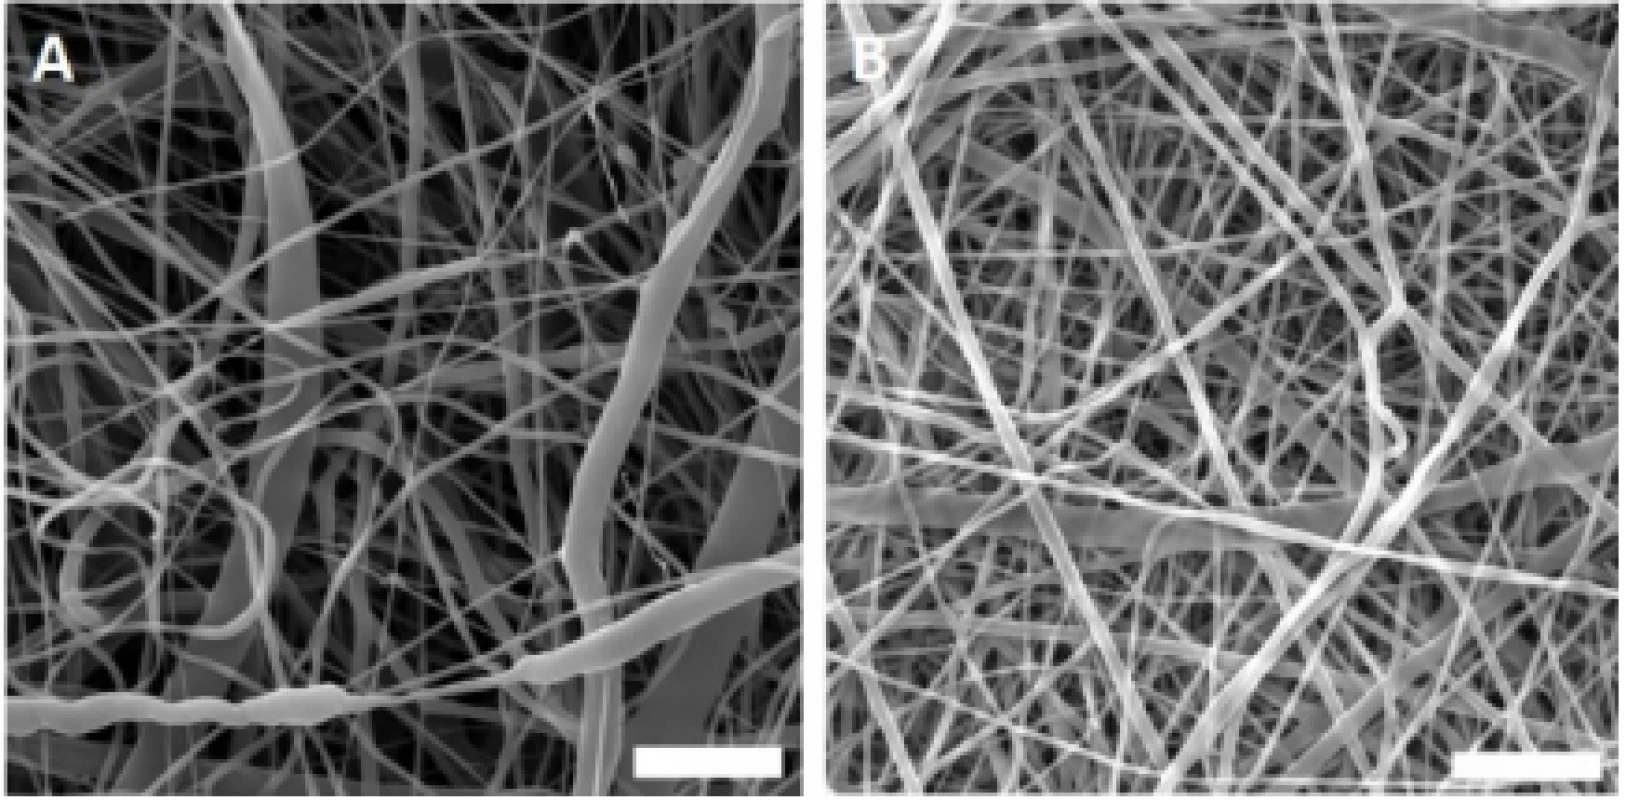 Scanning electron microscopy images of the
fabricated nanofibrous samples. A – PCL, B – PVA.
Magnification 10,000×; scale bar 5 µm.